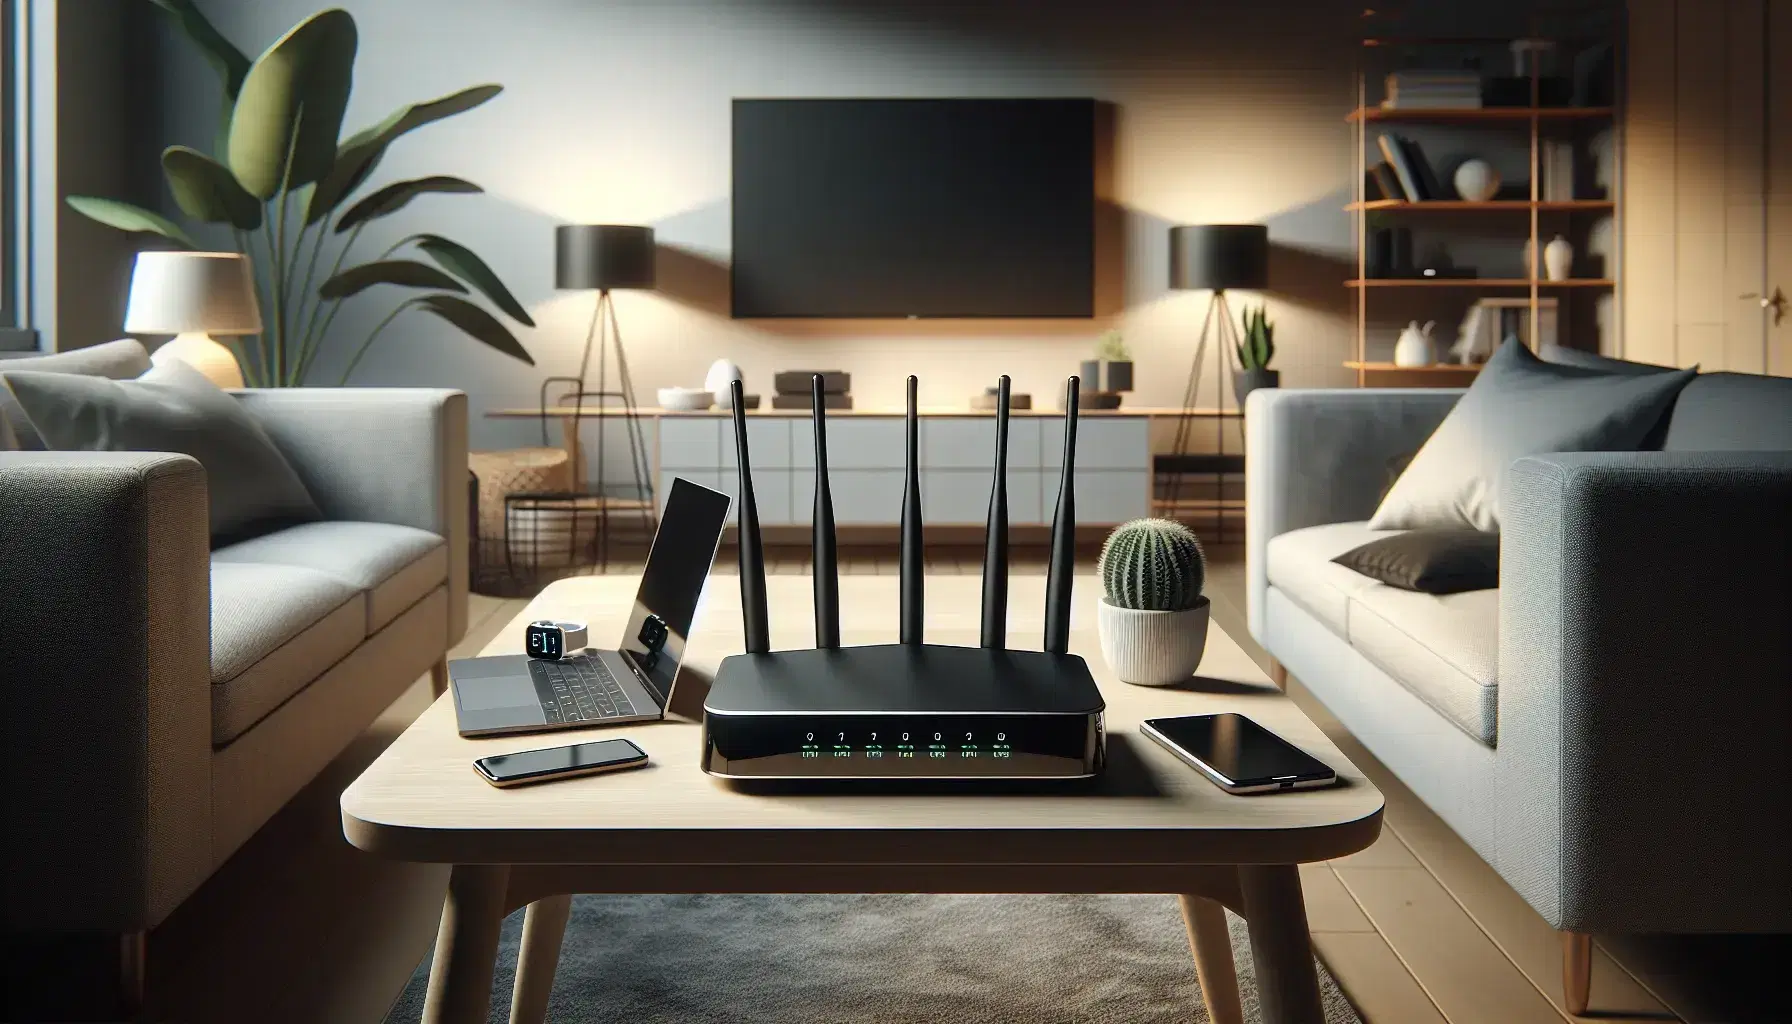 Black Wi-Fi router with antennas on wooden table, silver laptop, white smartphone on gray sofa and black smartwatch, turned off TV and green plant.